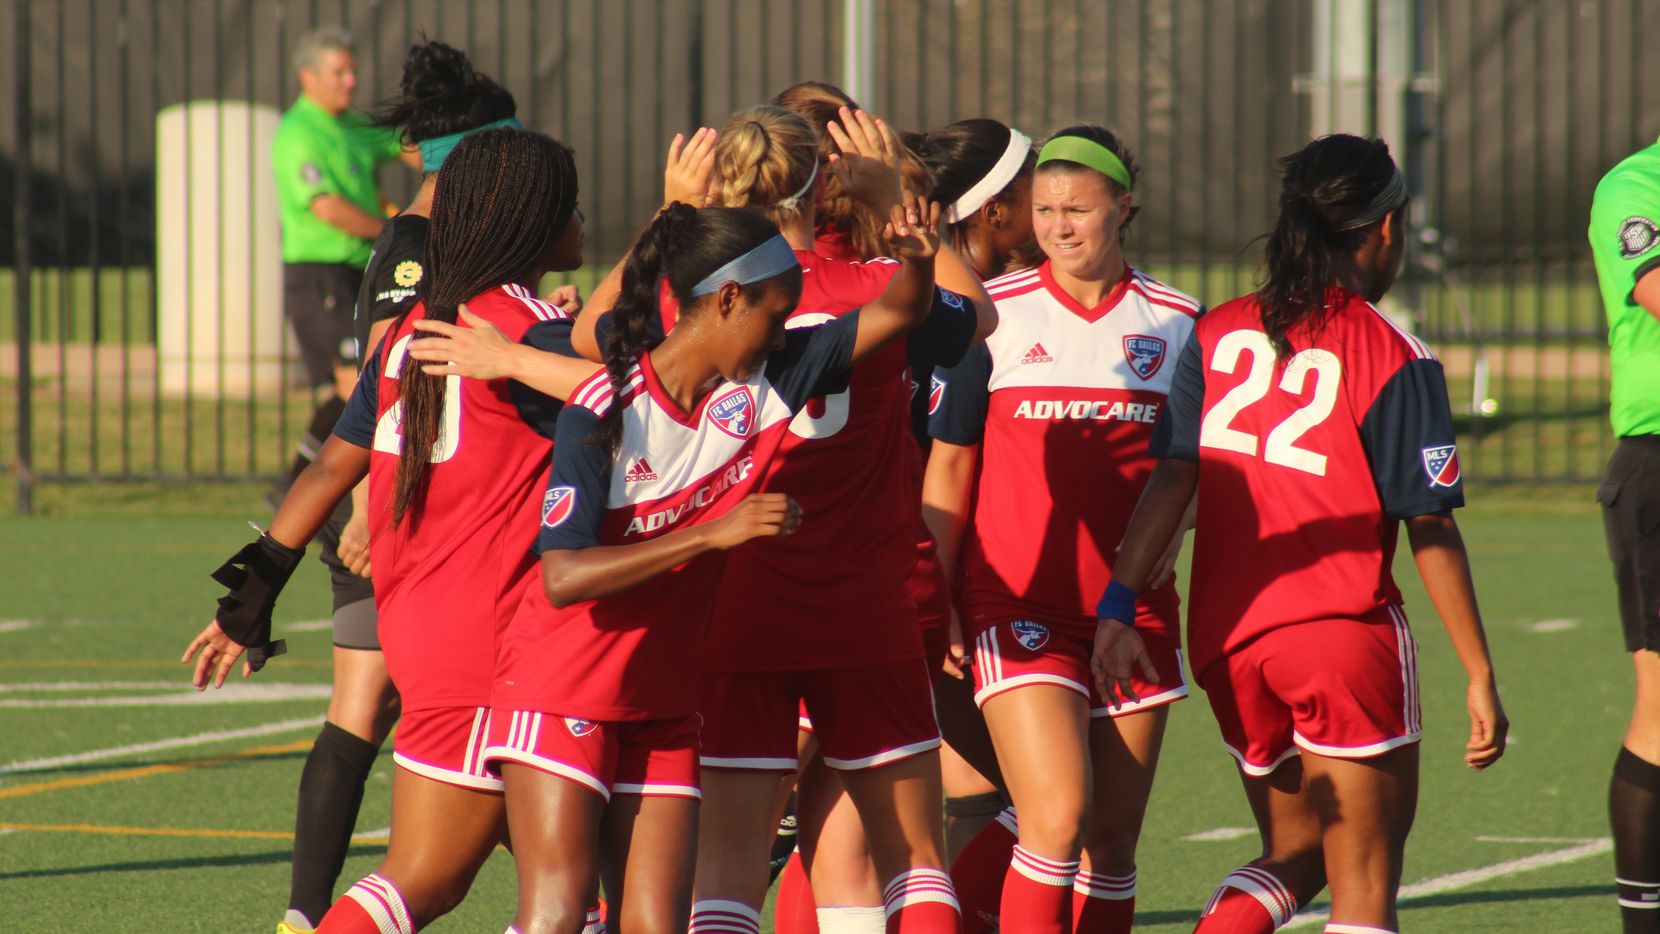 Toyota Soccer Center, Frisco TX (June 22, 2018): FC Dallas players congratulate Julie James on scoring the opening goal of a 5-1 win over Fortuna Tulsa.(Dan Crooke / 3rd Degree)